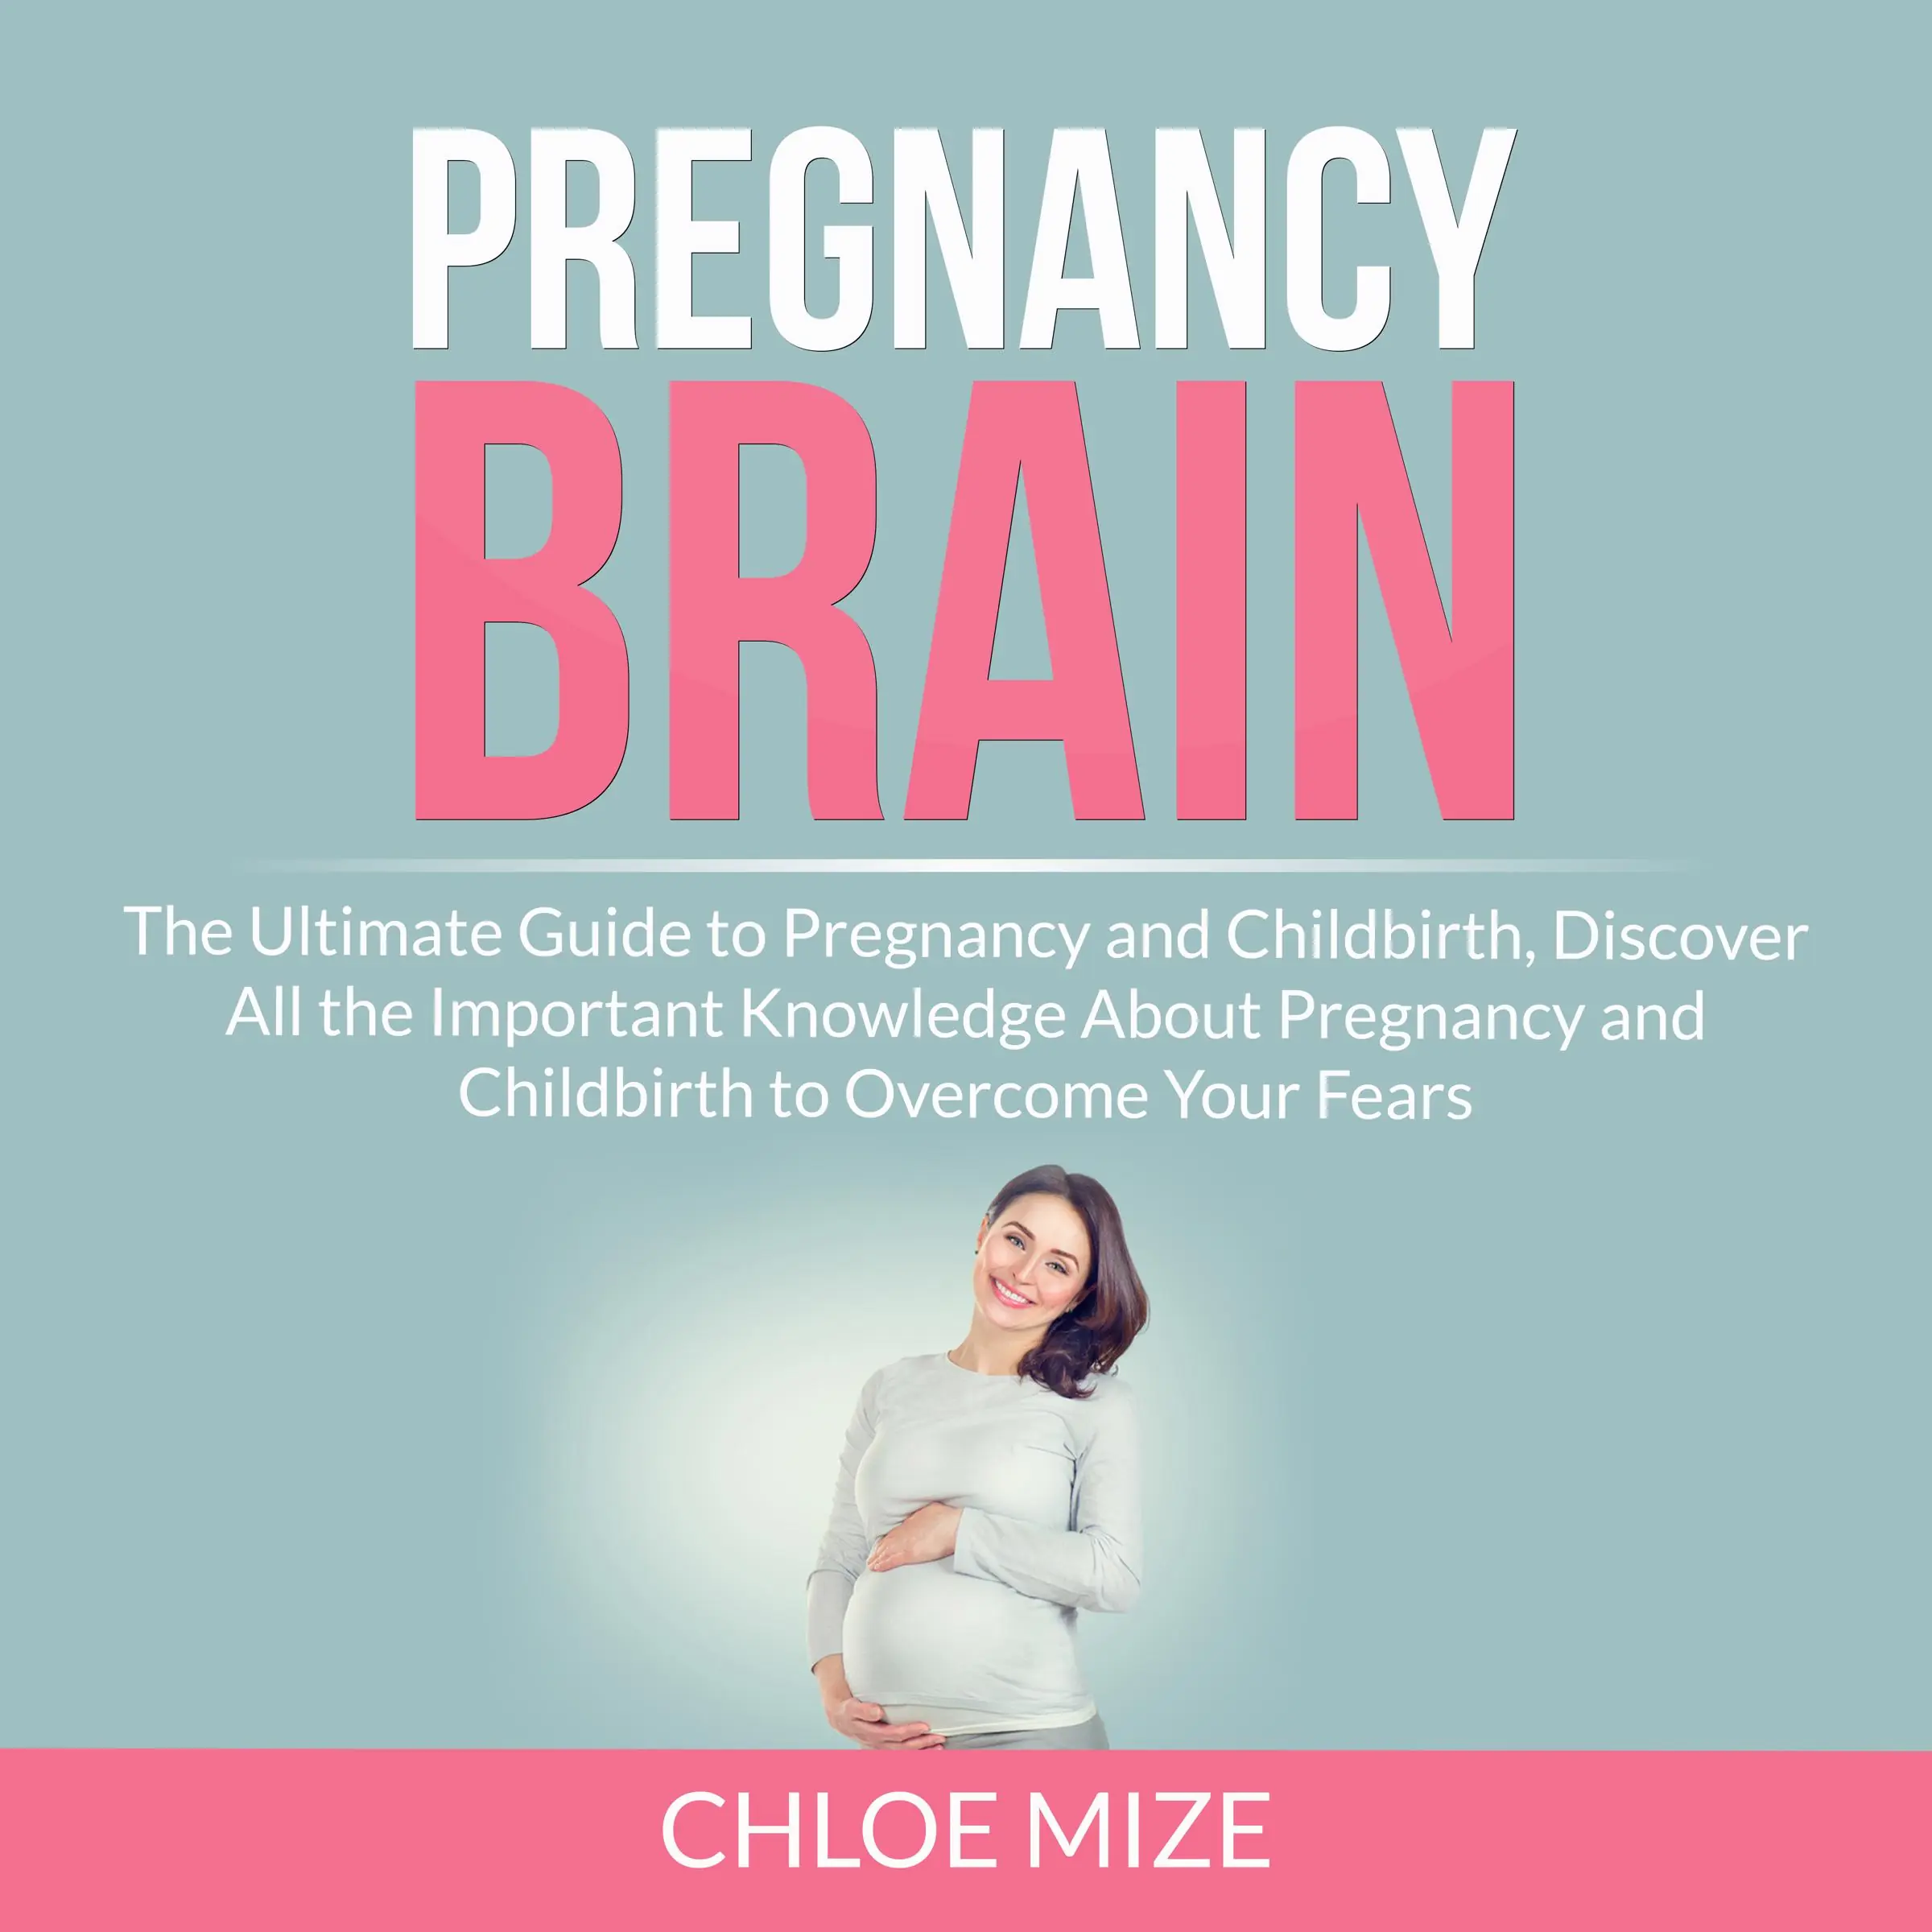 Pregnancy Brain: The Ultimate Guide to Pregnancy and Childbirth, Discover All the Important Knowledge About Pregnancy and Childbirth to Overcome Your Fears Audiobook by Chloe Mize